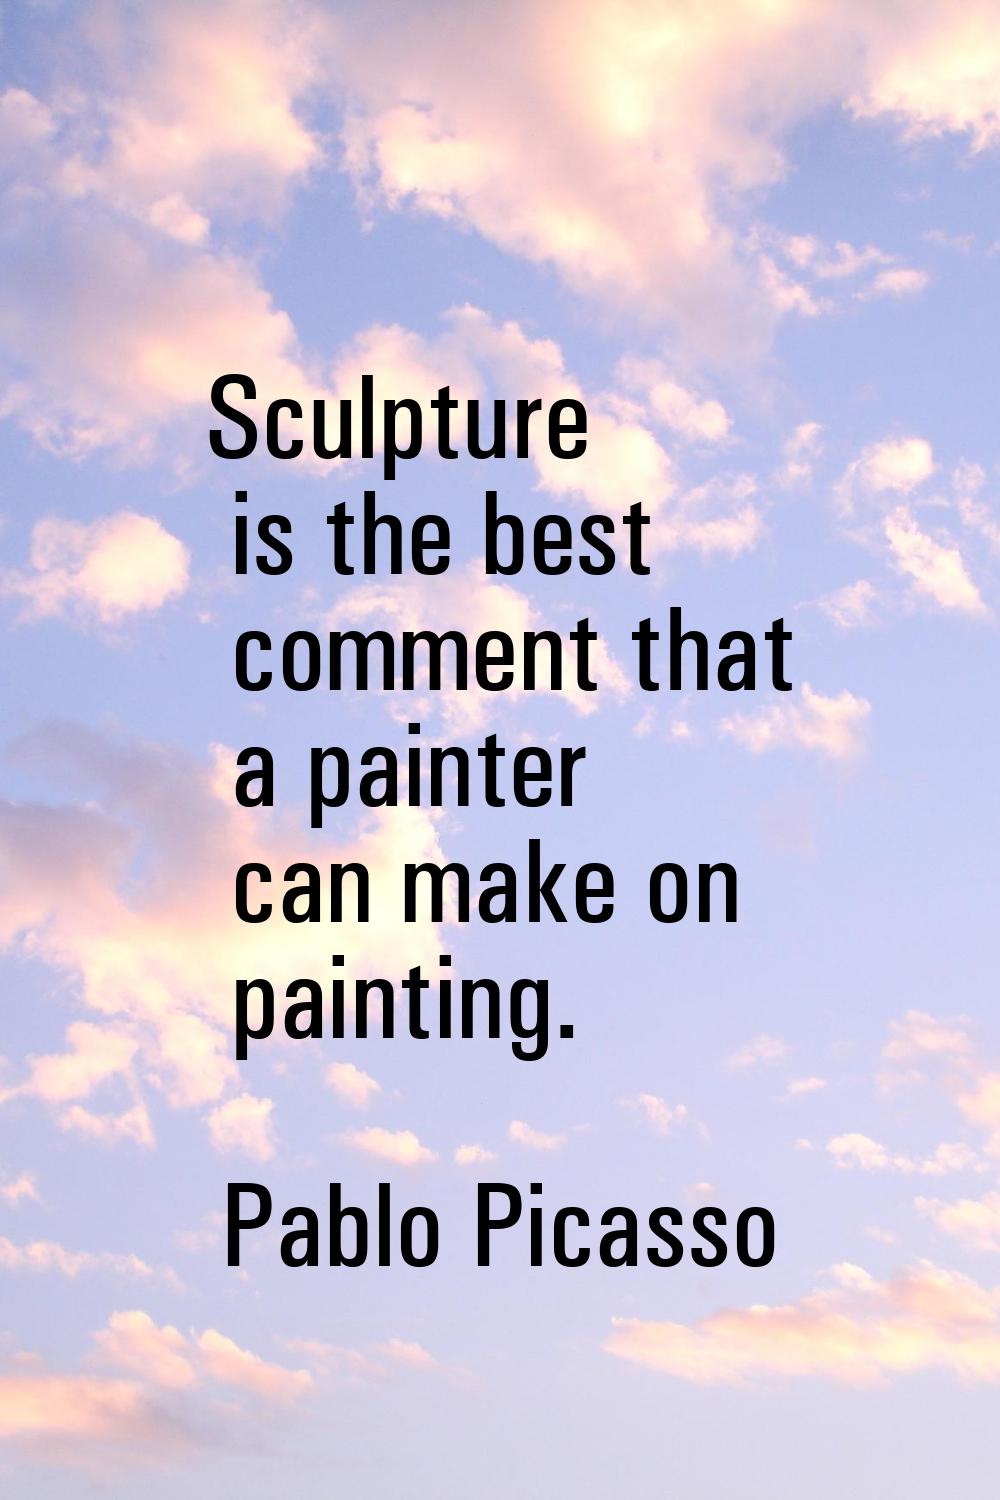 Sculpture is the best comment that a painter can make on painting.